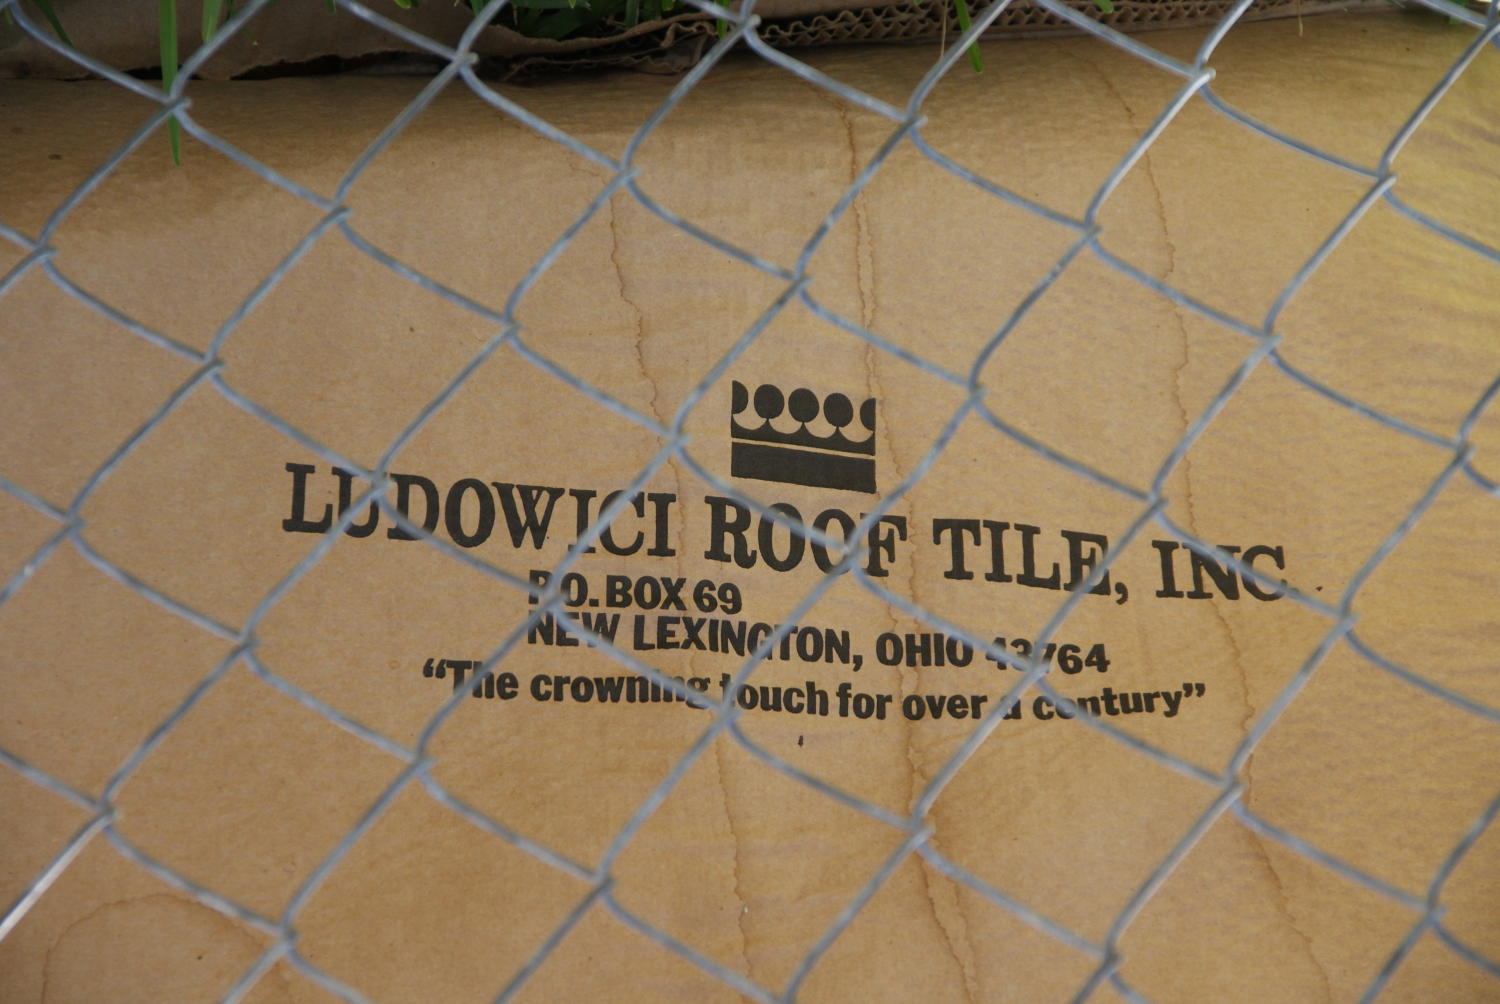 [Roof Tile Box]
                                                
                                                    [Sequence #]: 1 of 1
                                                